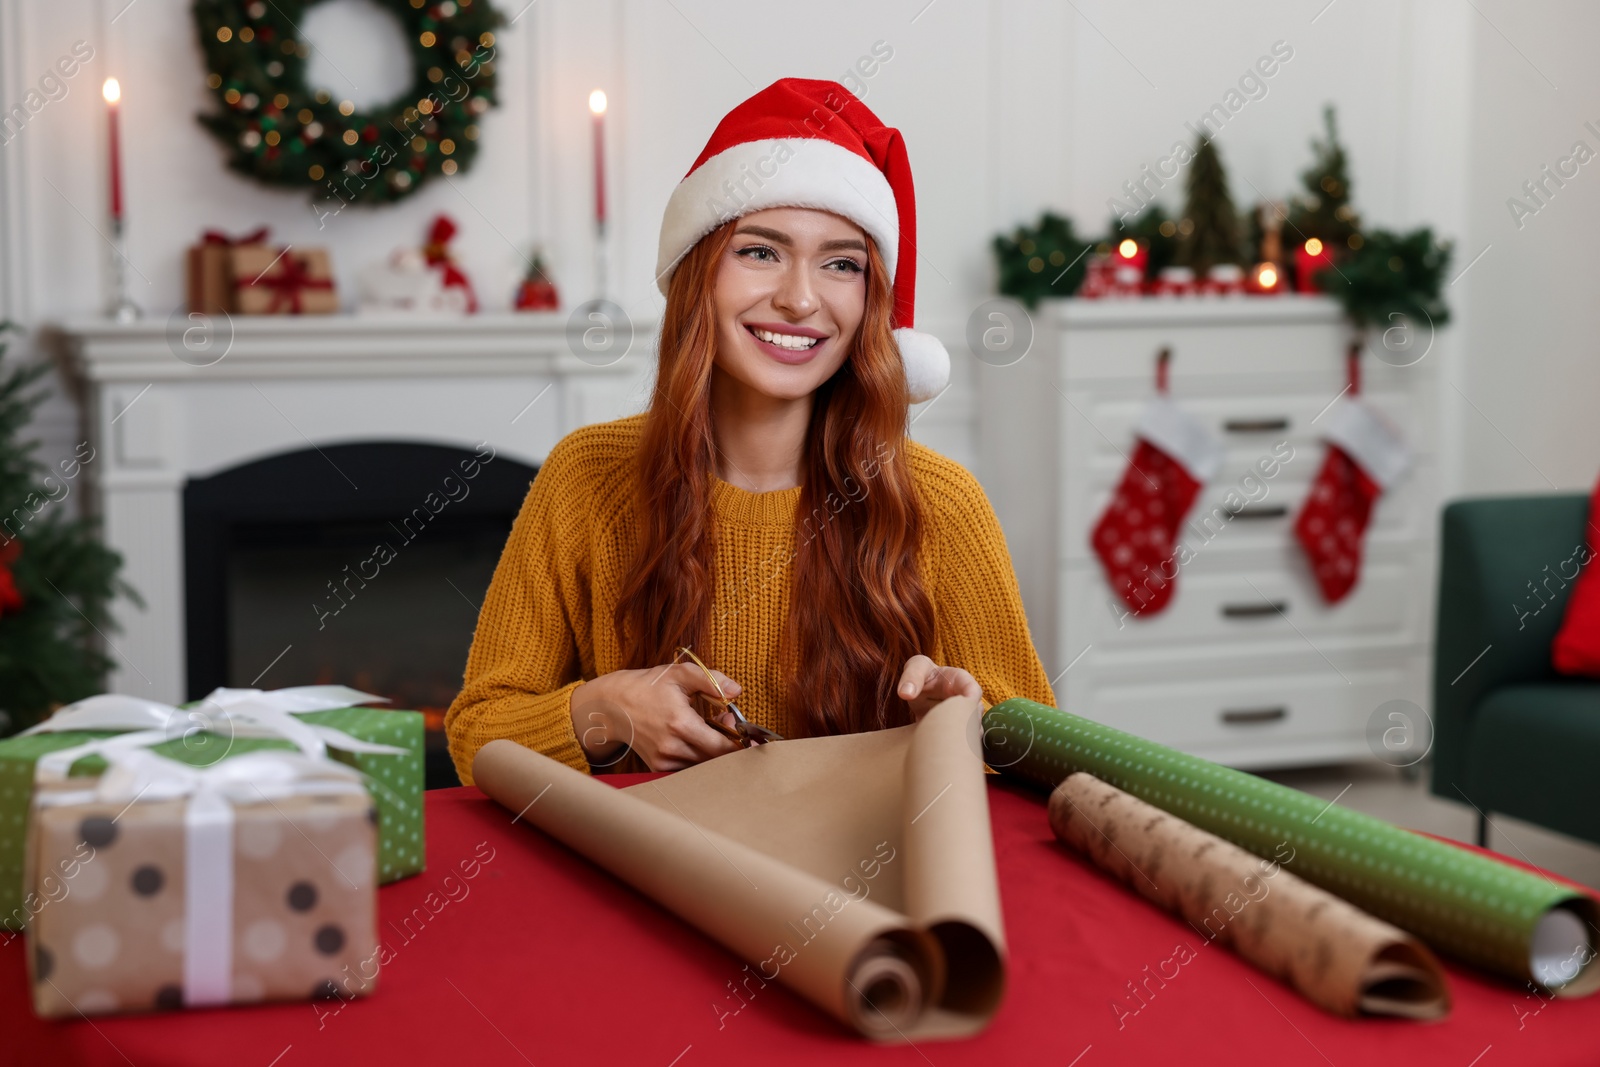 Photo of Beautiful young woman in Santa hat cutting wrapping paper at table. Decorating Christmas present